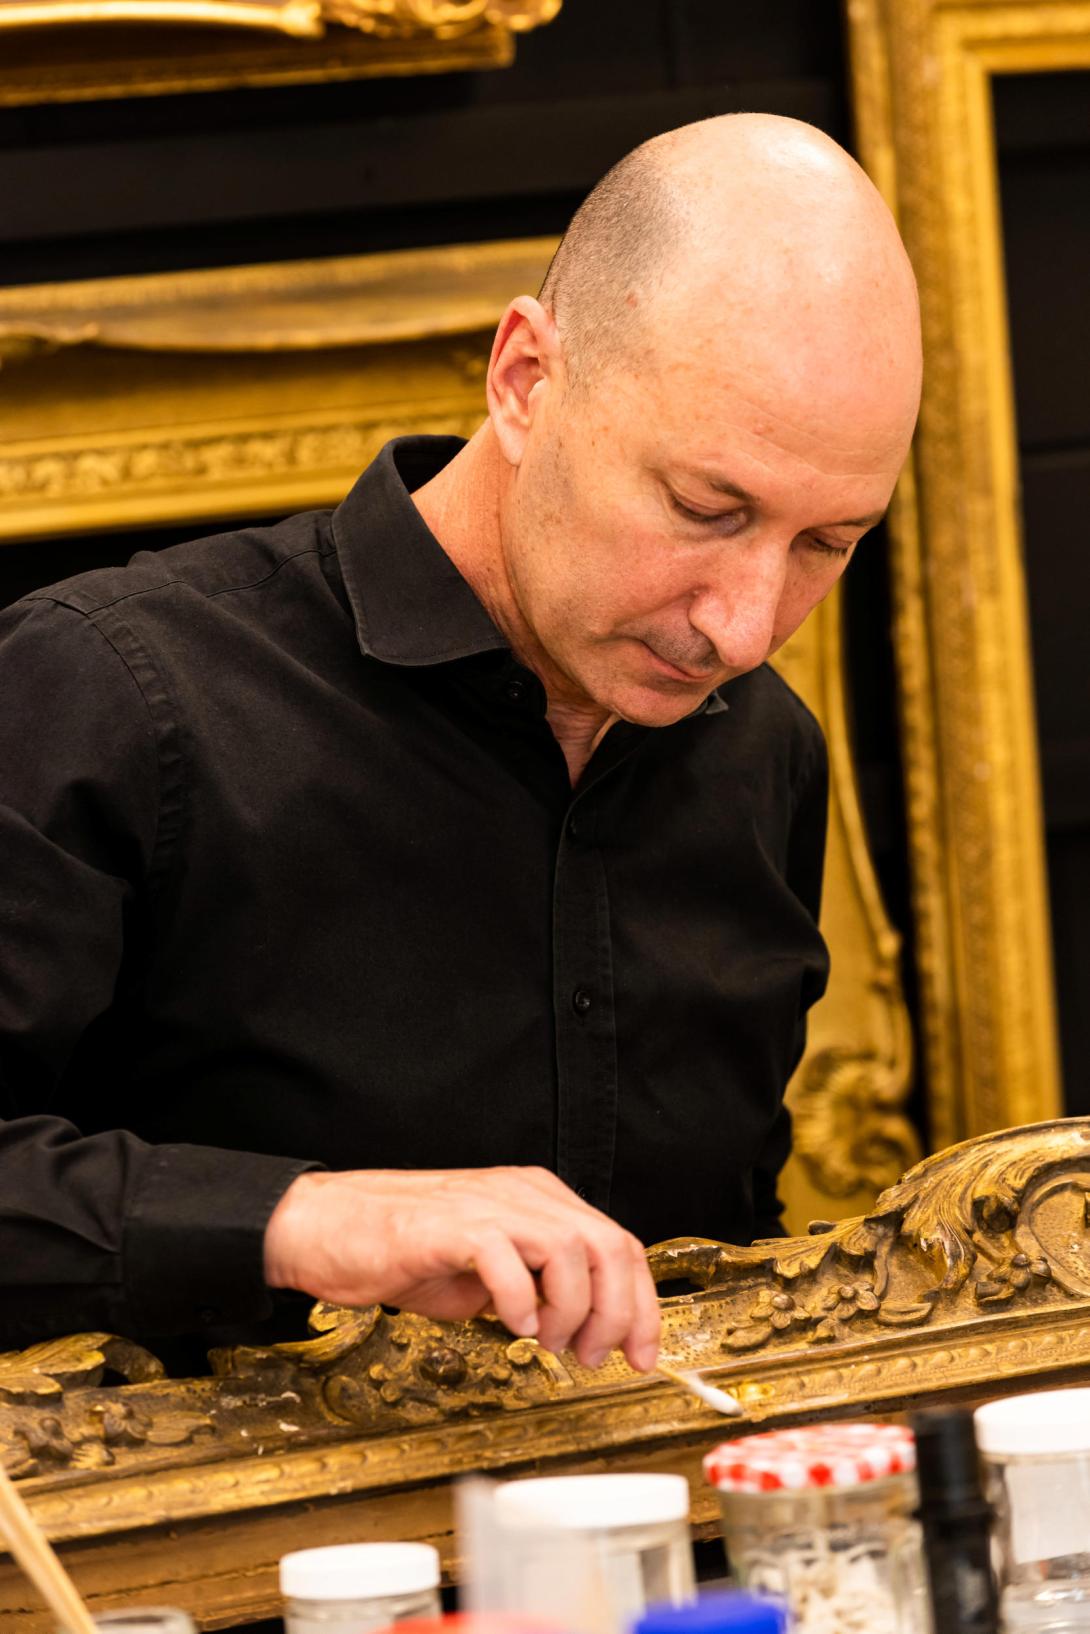 A man in a black shirt works on a gold-gilded frame in the QAG Framing Workshop.